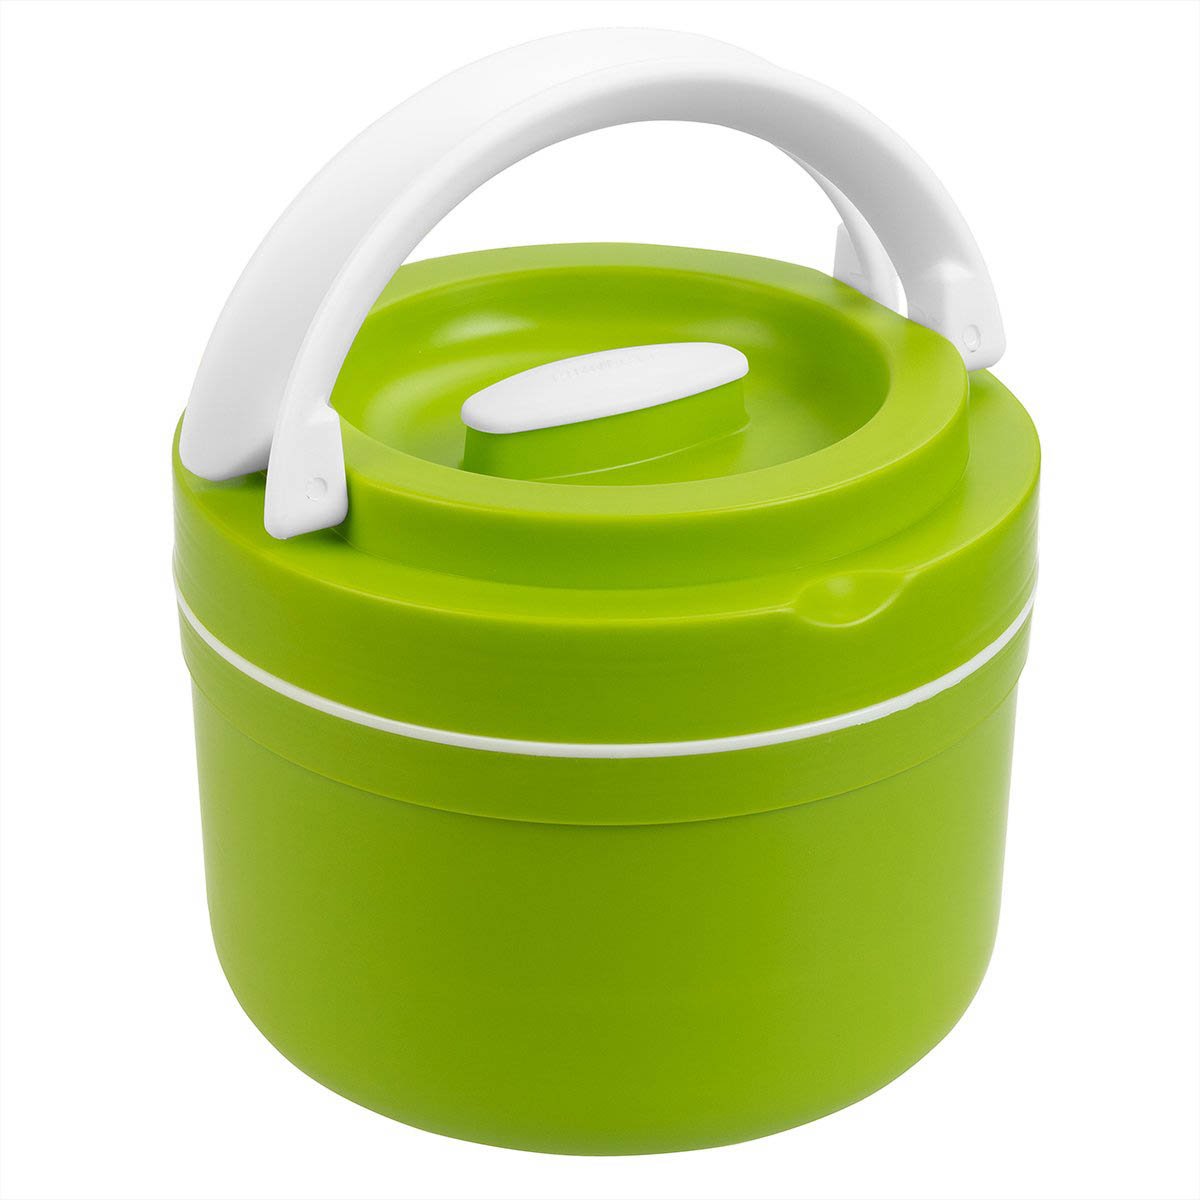 Prime, Green Plastic Lunch Container | 84.5 oz | Stainless Steel Insulation